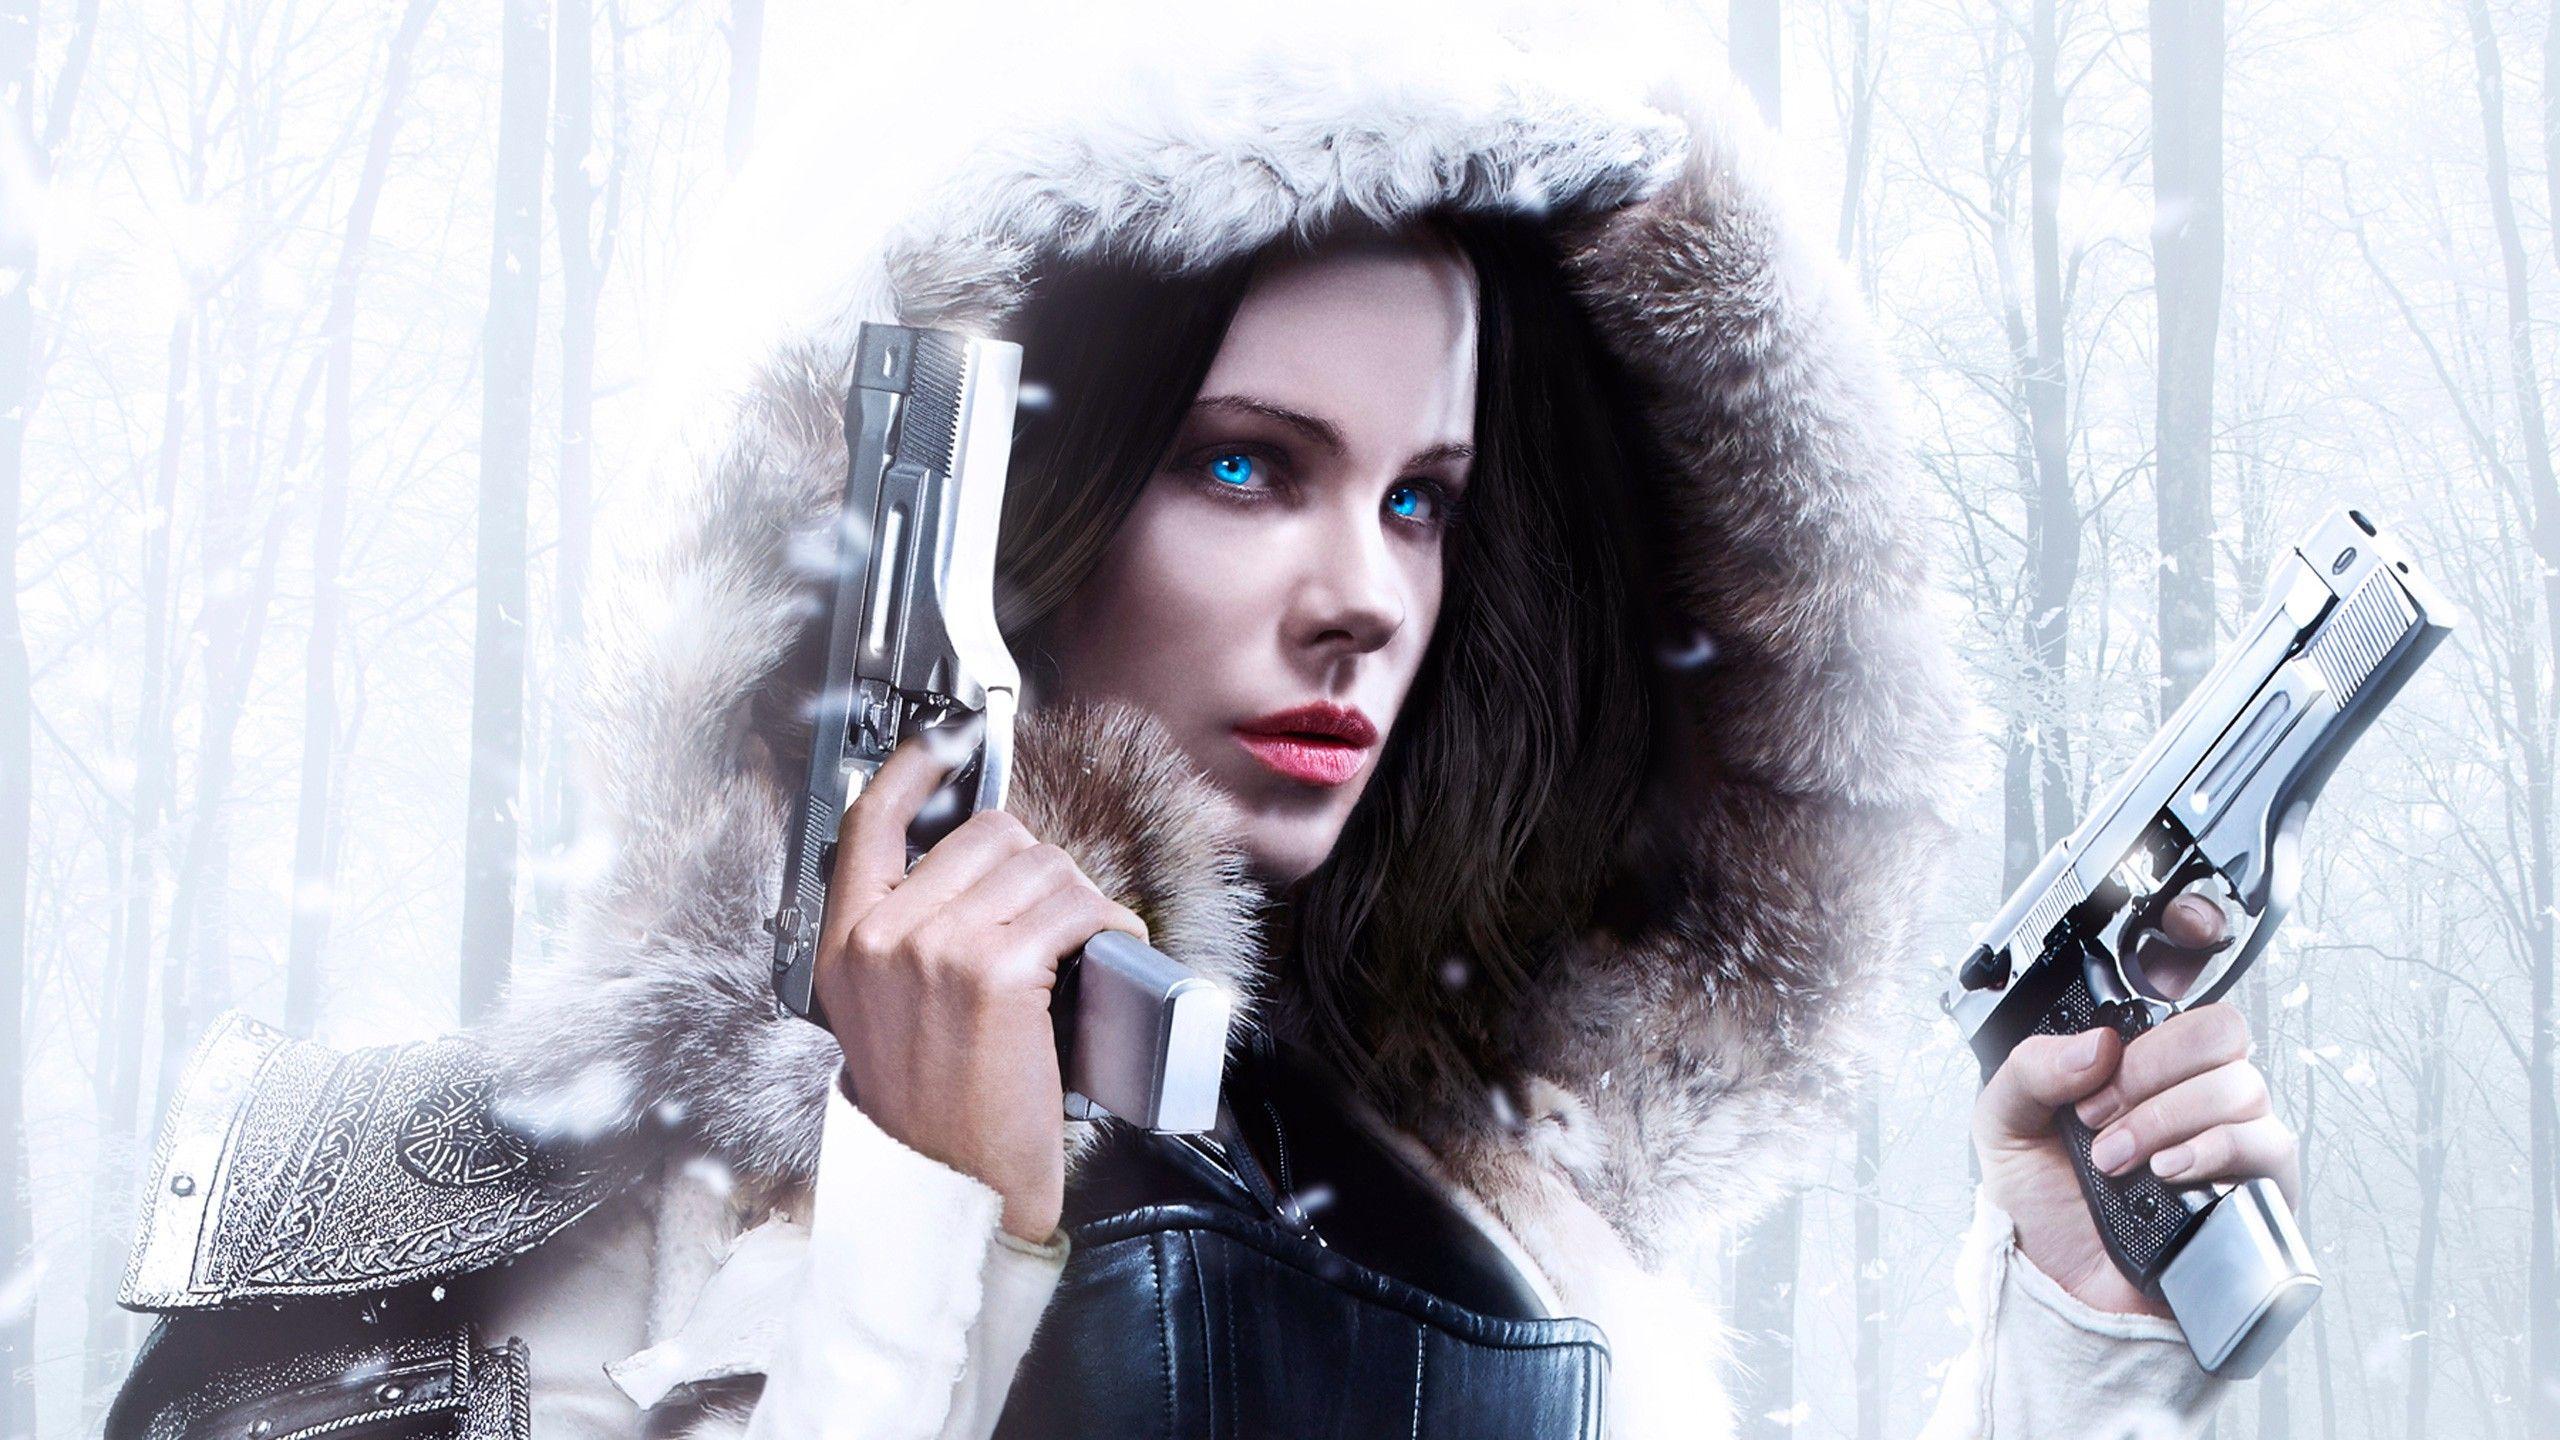 Underworld: Blood Wars Info, Posters, Wallpaper, and Tracking 2048